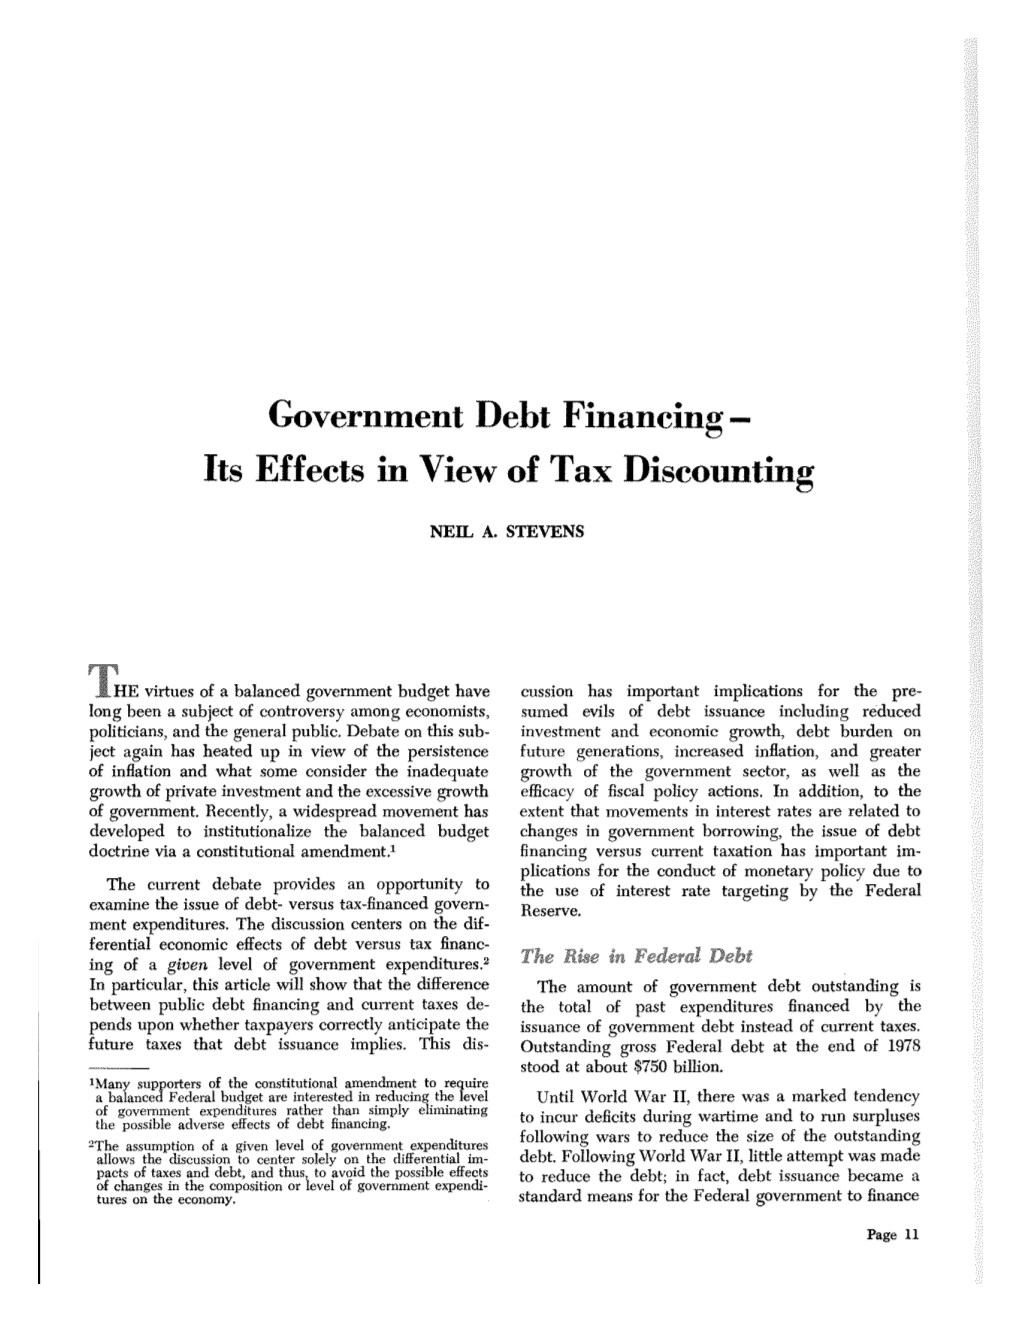 Government Debt Financing—Its Effects in View of Tax Discounting